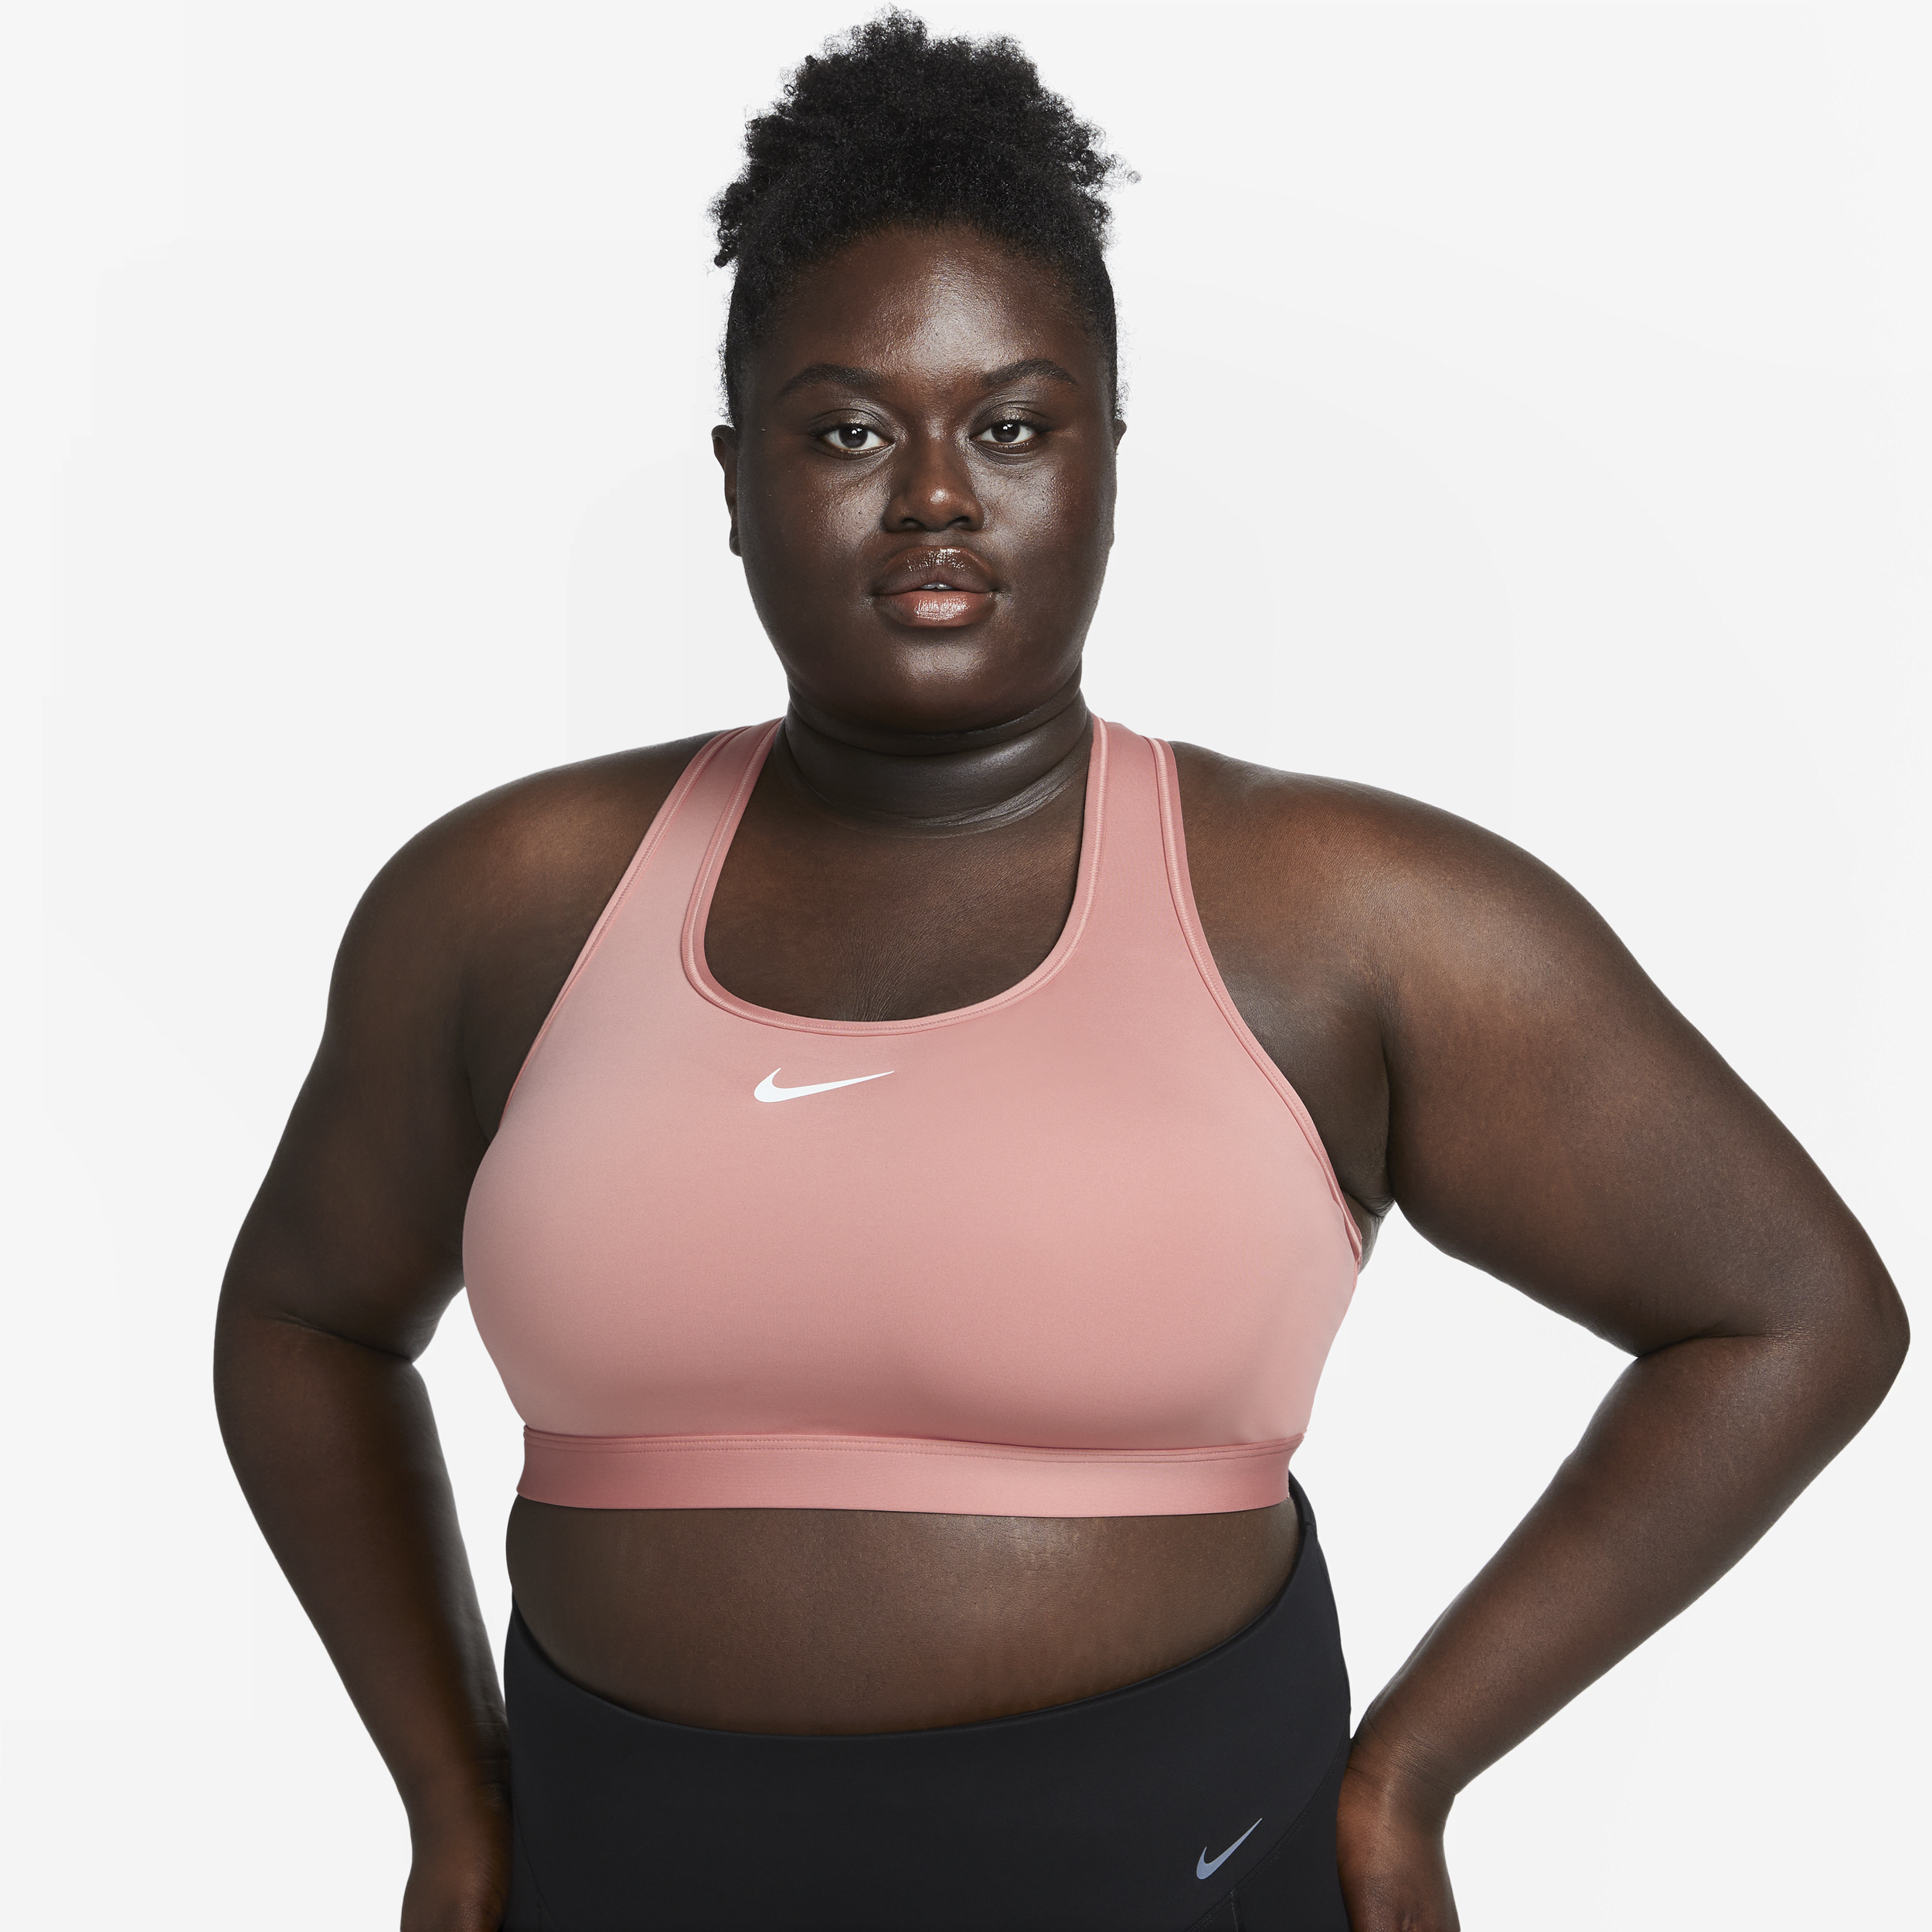 Sports with support: The Fulcrum's top sports bras